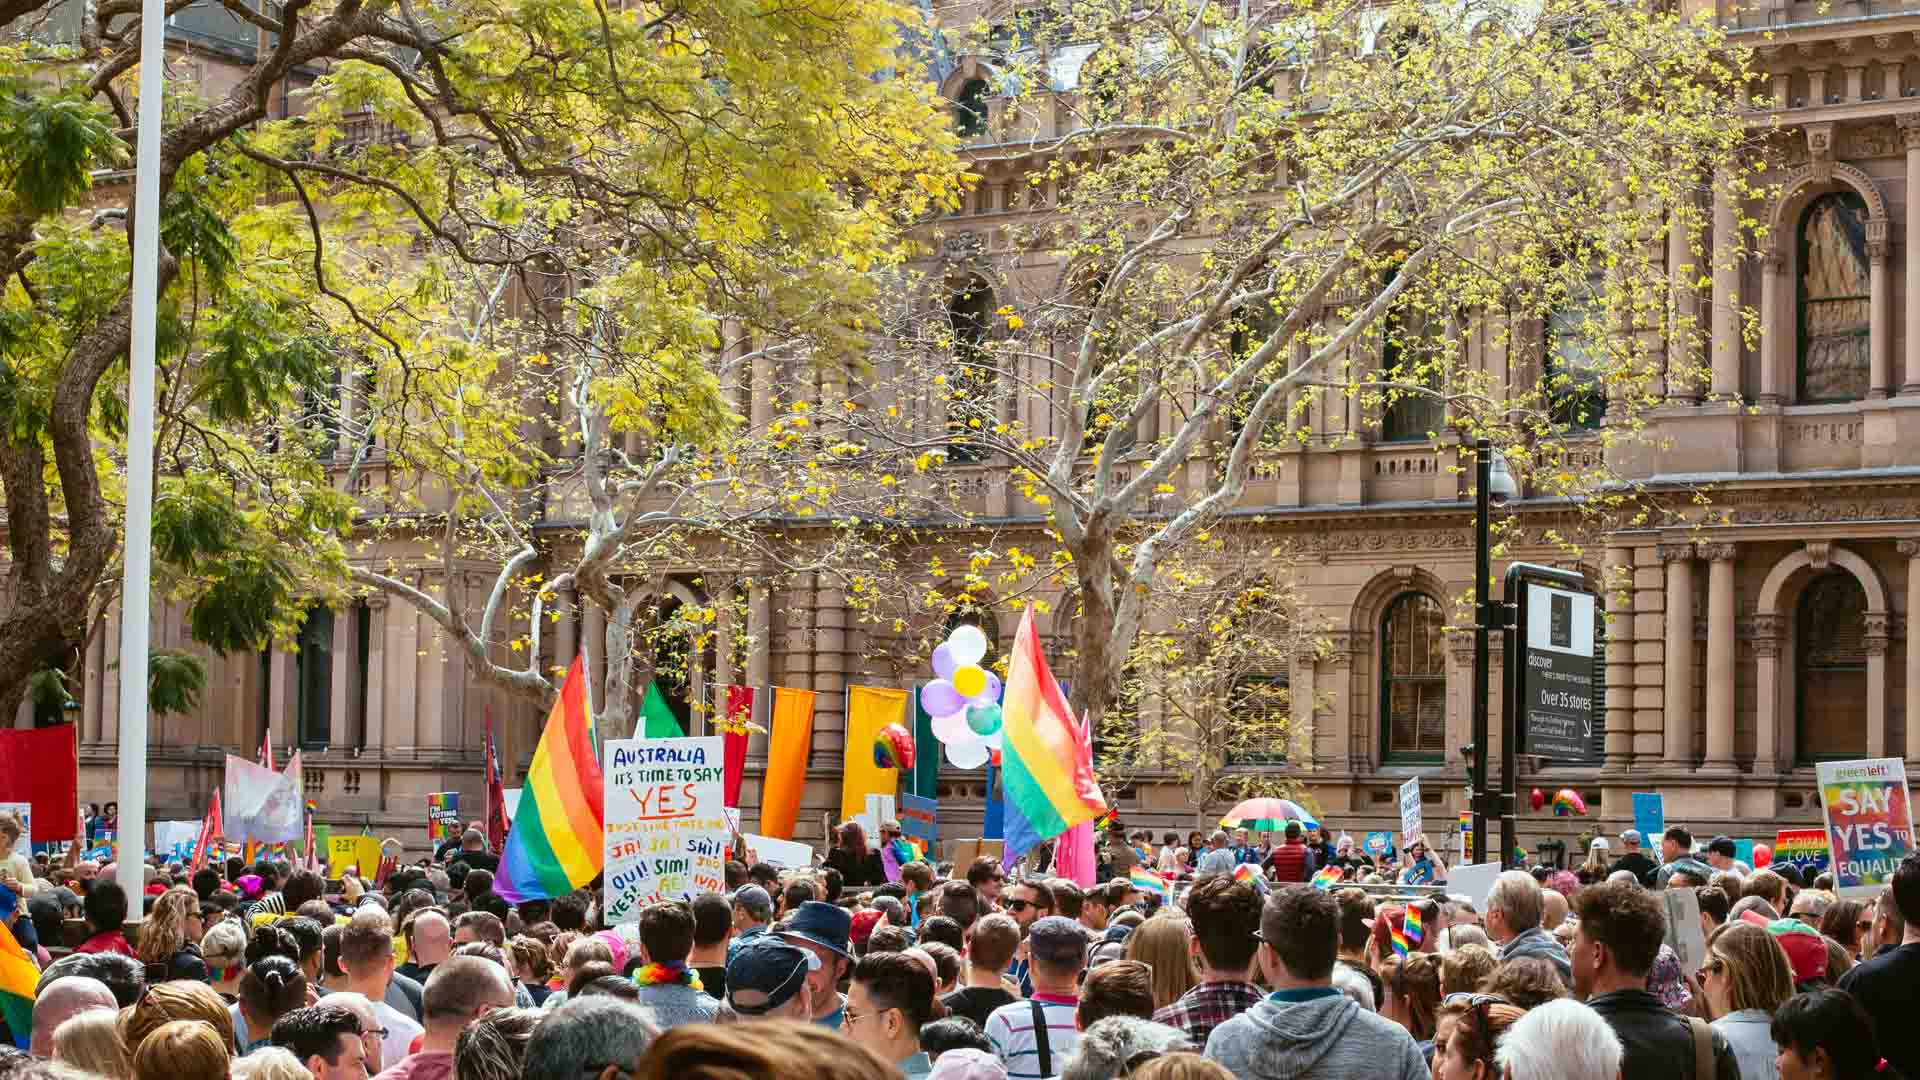 Yes Rally for Marriage Equality